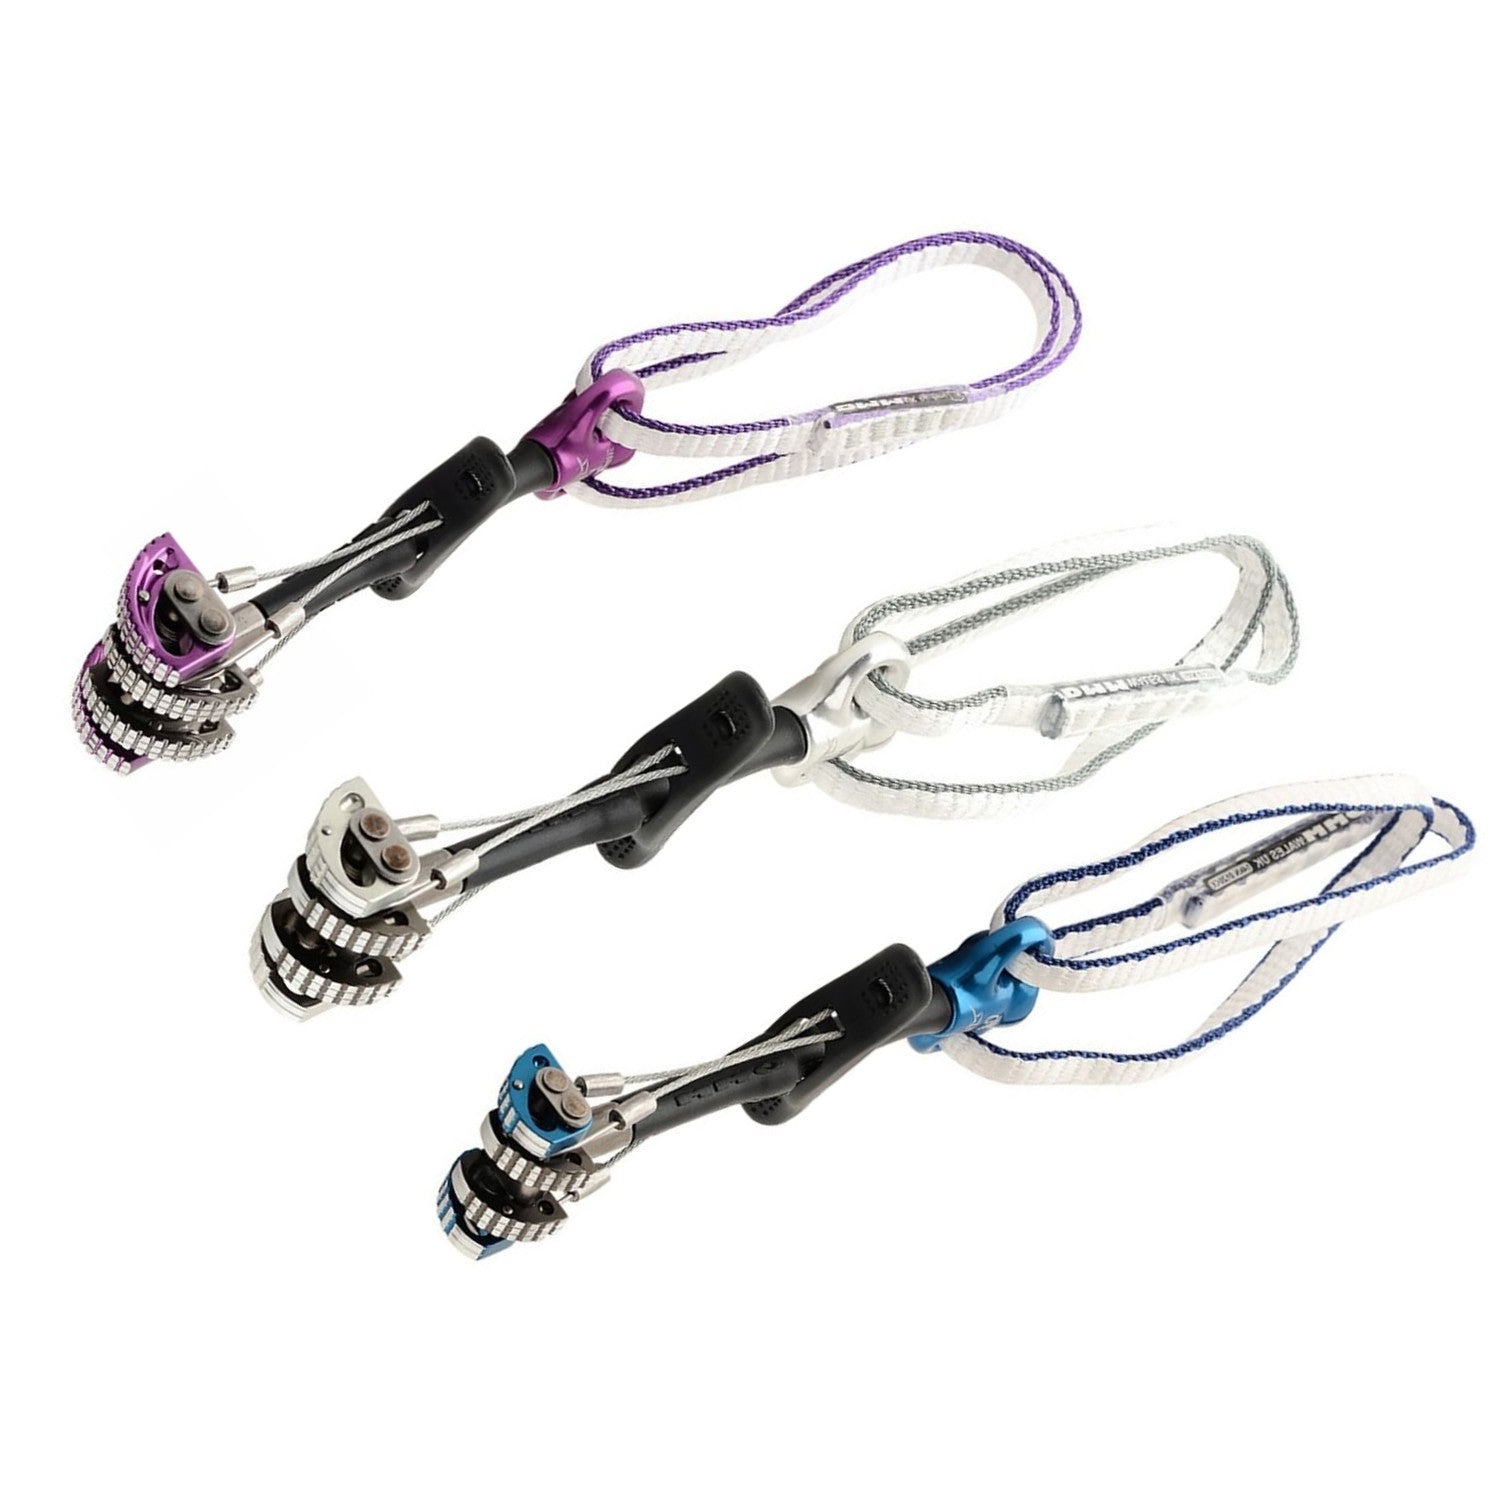 DMM Dragon climbing cam set in sizes 00 (Blue), 0 (Grey), and 1 (Purple), shown side by side